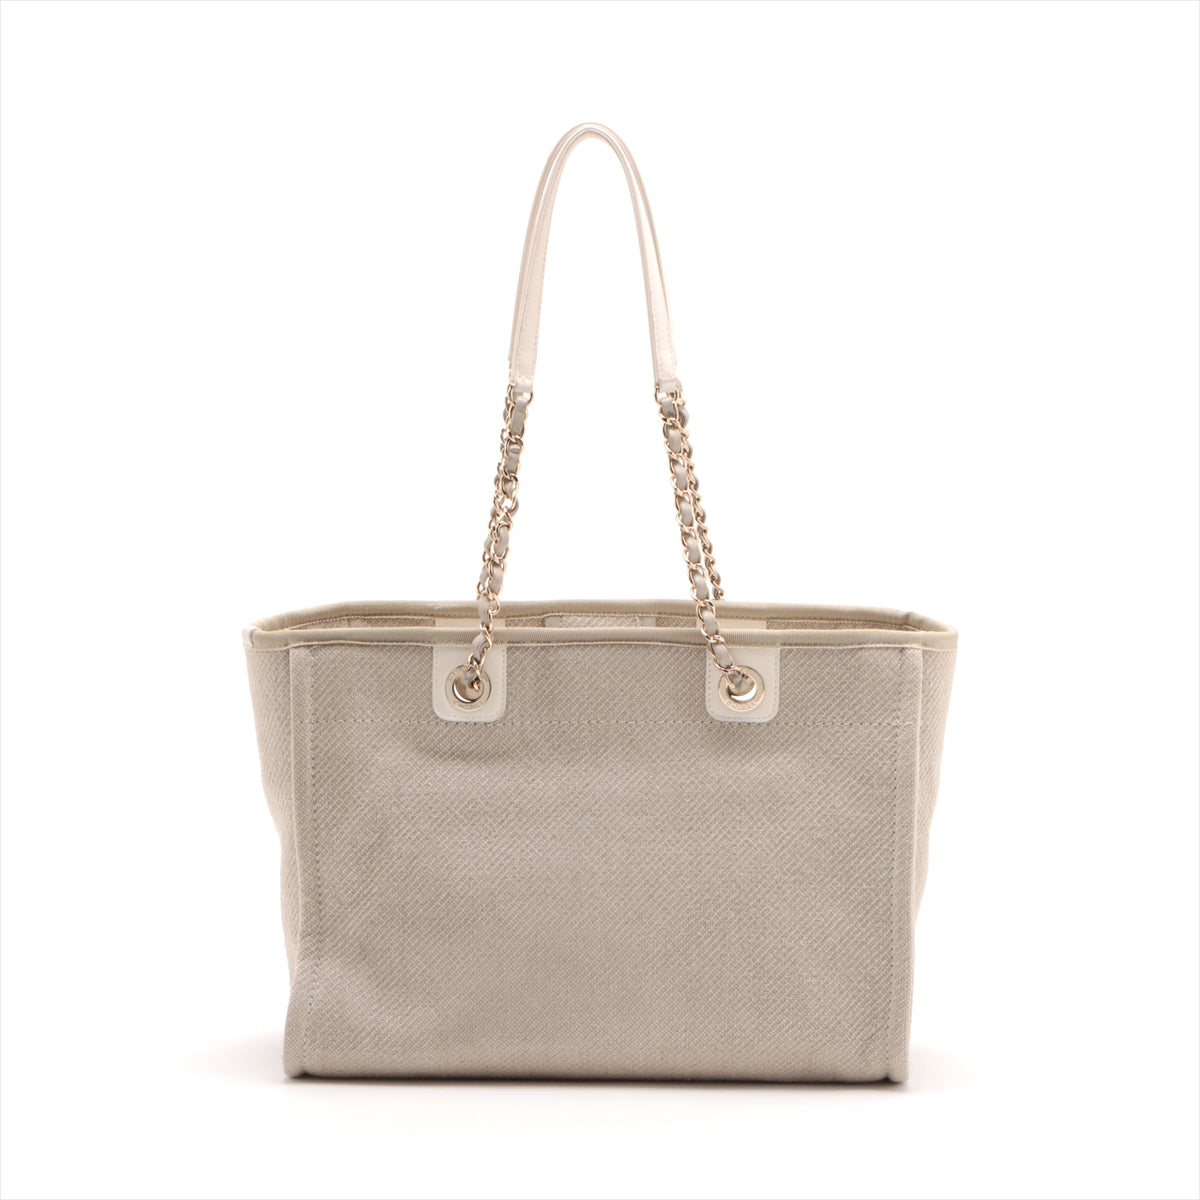 Chanel Deauville MM Canvas & leather Chain tote bag Beige Gold Metal fittings